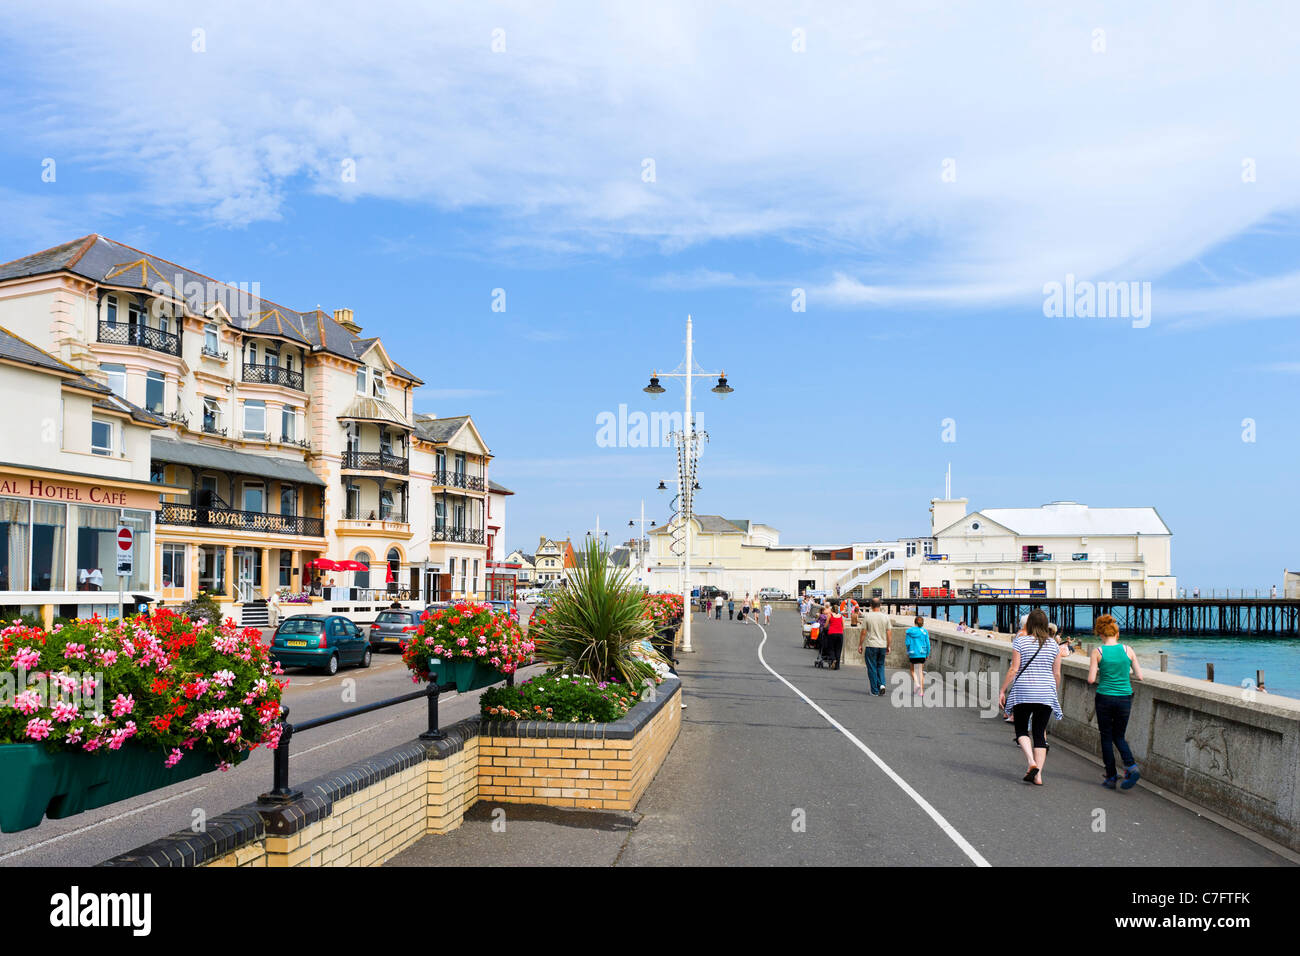 The pier and seafront promenade with the Royal Hotel to the left, Bognor Regis, West Sussex, England, UK Stock Photo